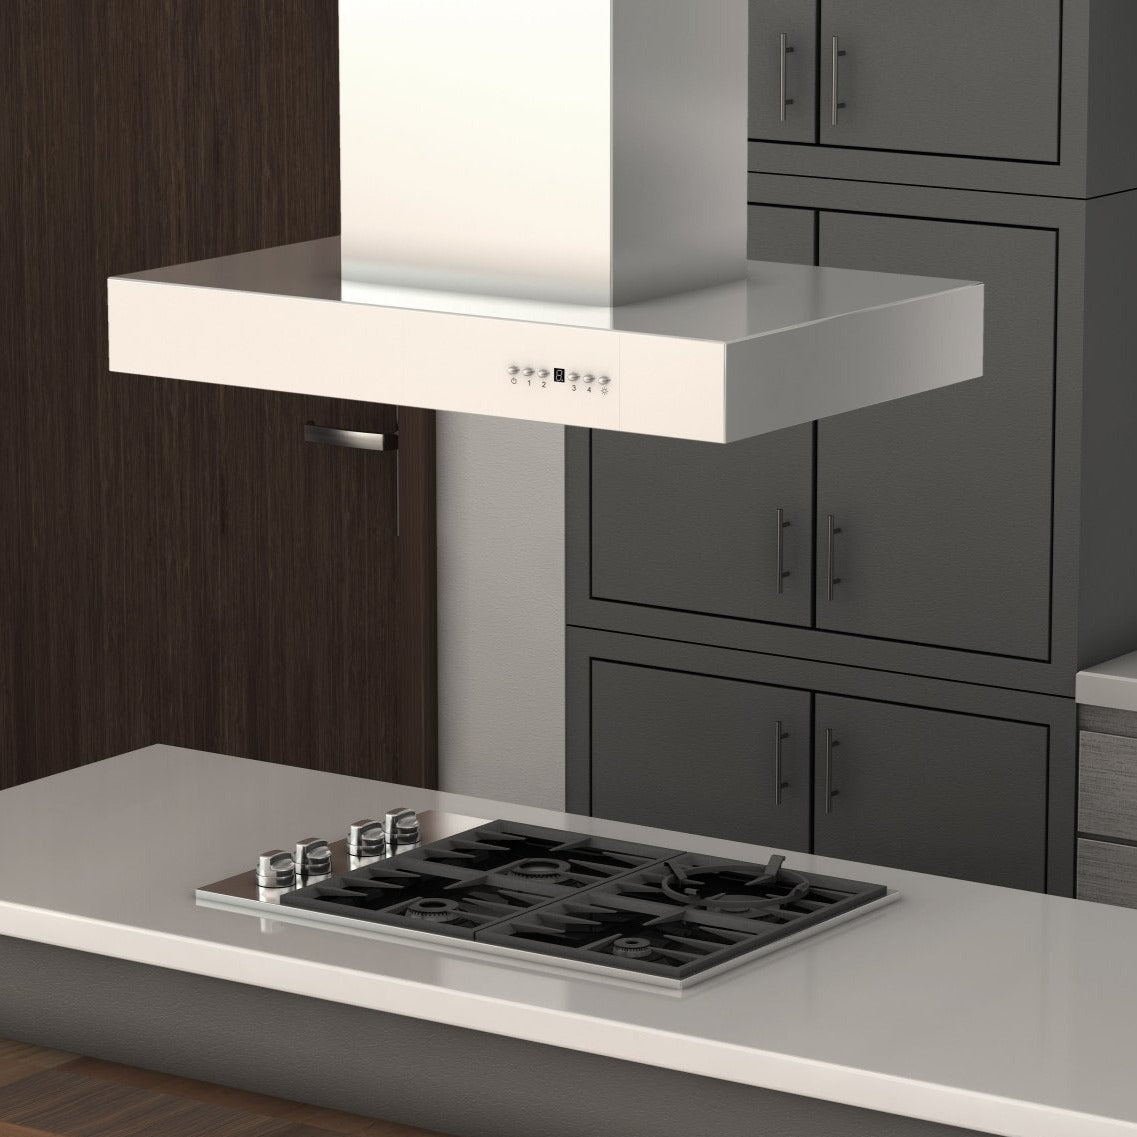 ZLINE Ducted Professional Island Mount Range Hood in Stainless Steel (KECOMi) rendering in a luxury kitchen close up.